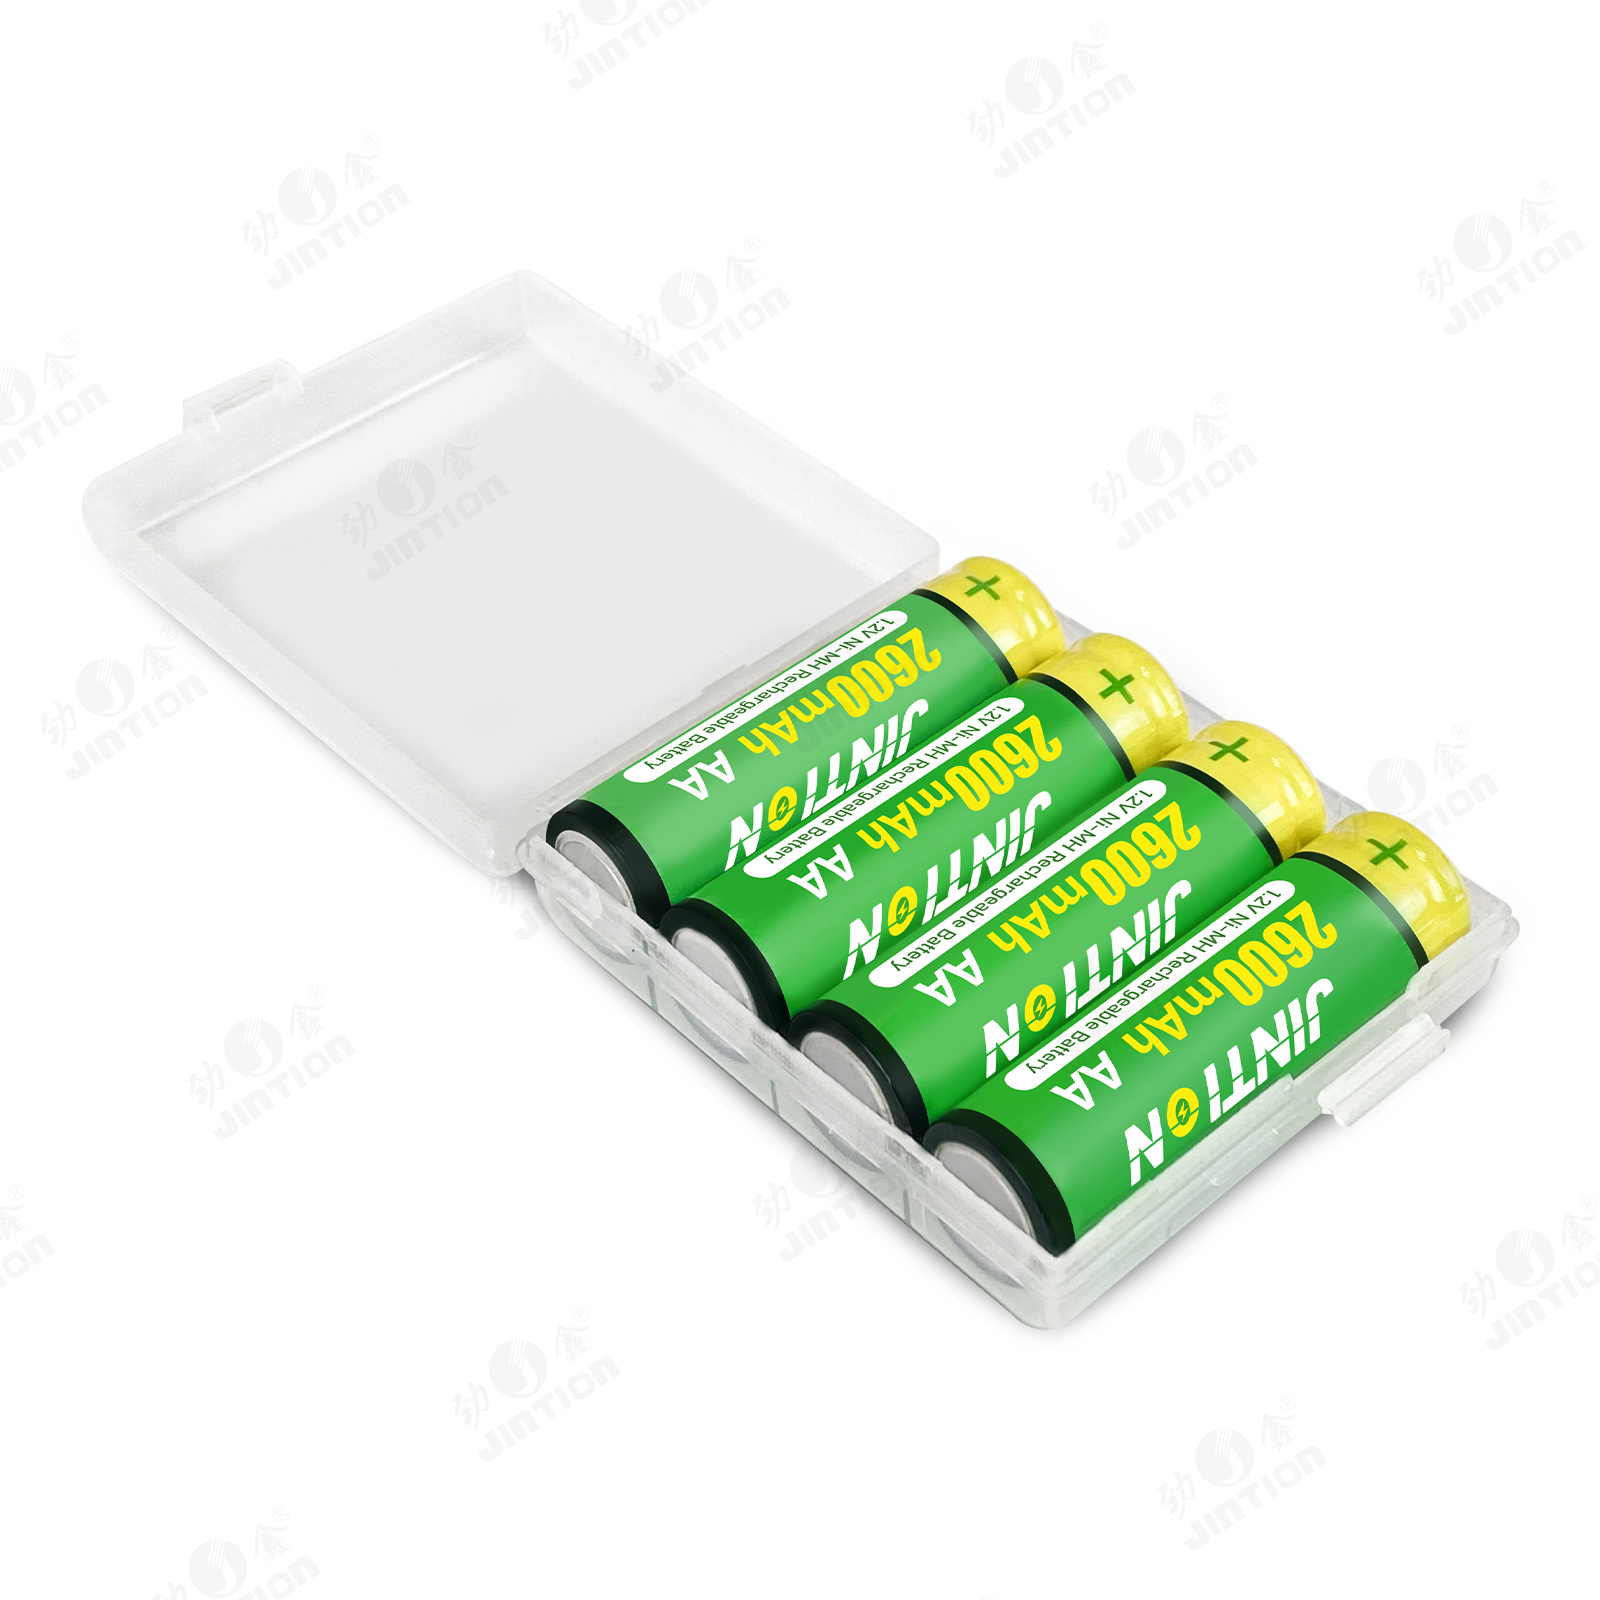 JINTION NiMh AA 2600mAh 1.2v aa rechargeable battery nimh battery aa 1.2v rechargeable batteries Customize box-packed four-pack